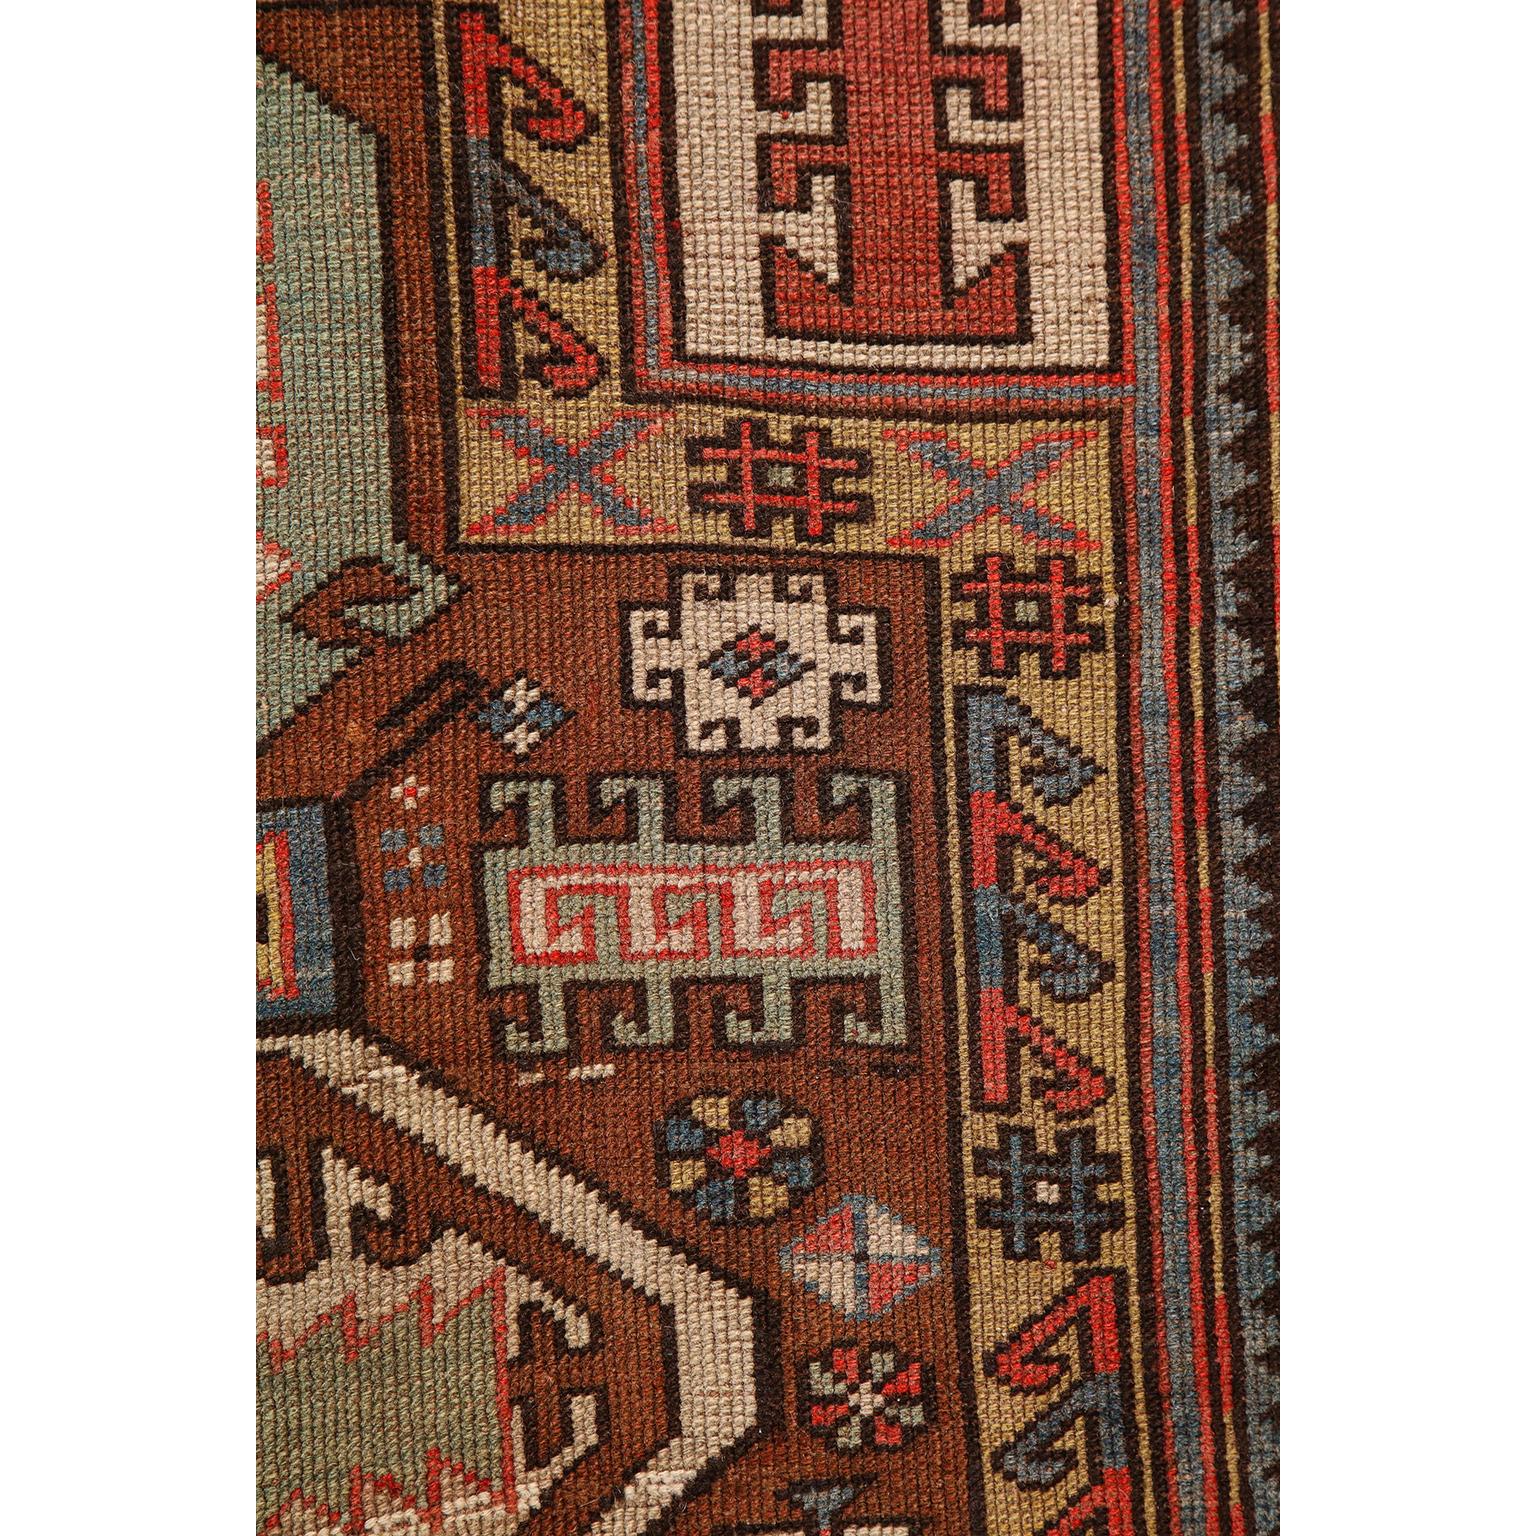 Antique 1880s Caucasian Rug, Wool, Blue, Green, Red, 4' x 6' For Sale 5